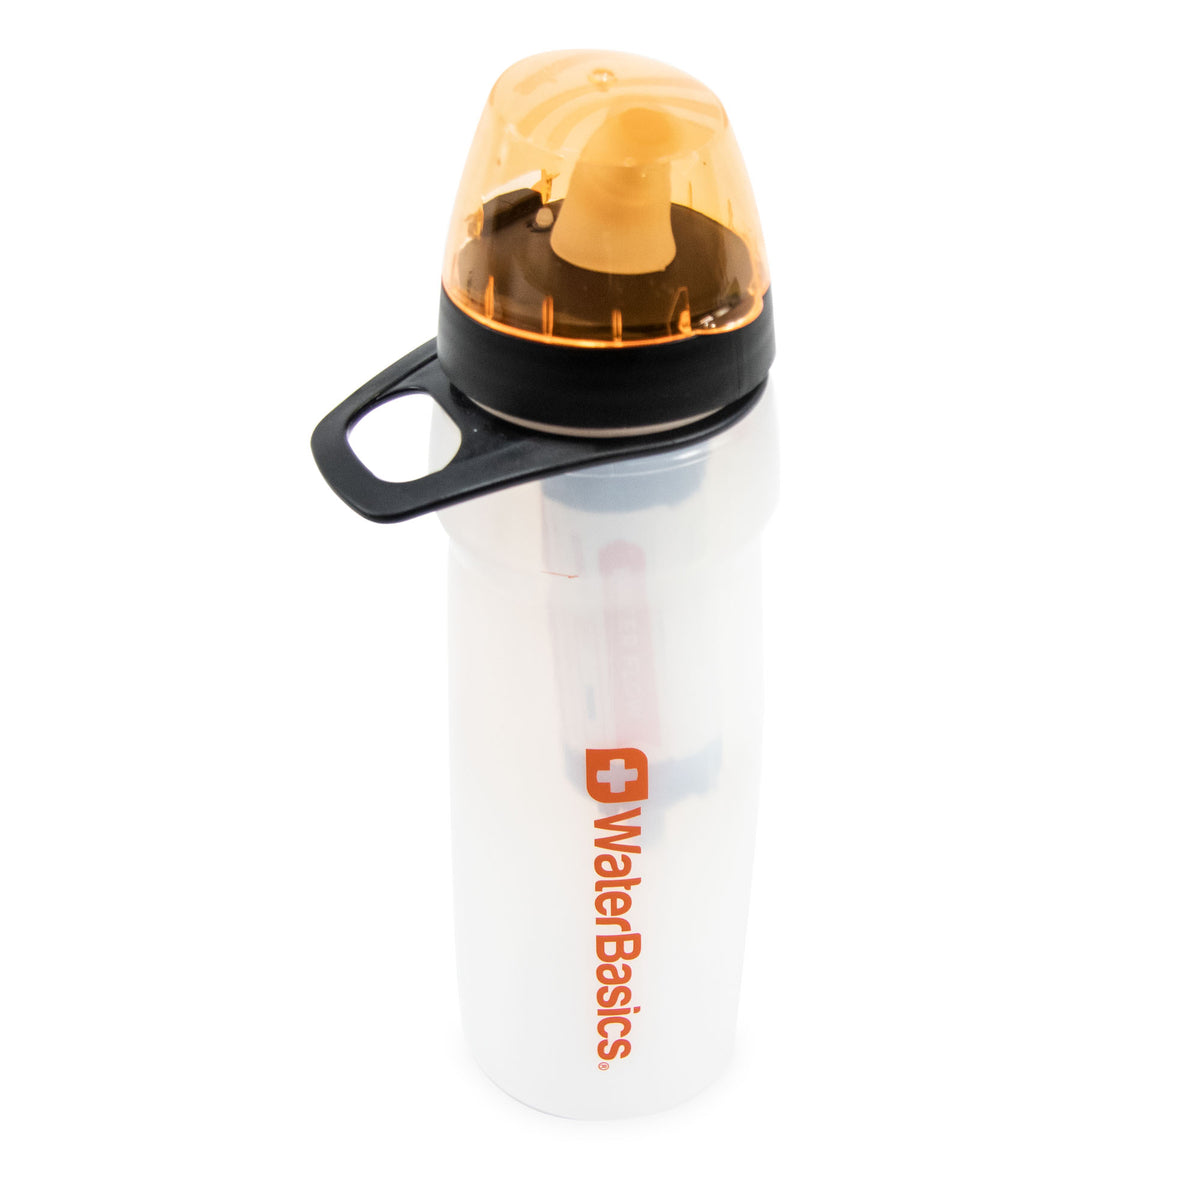 WaterBasics Filtered Water Bottle - Red Line